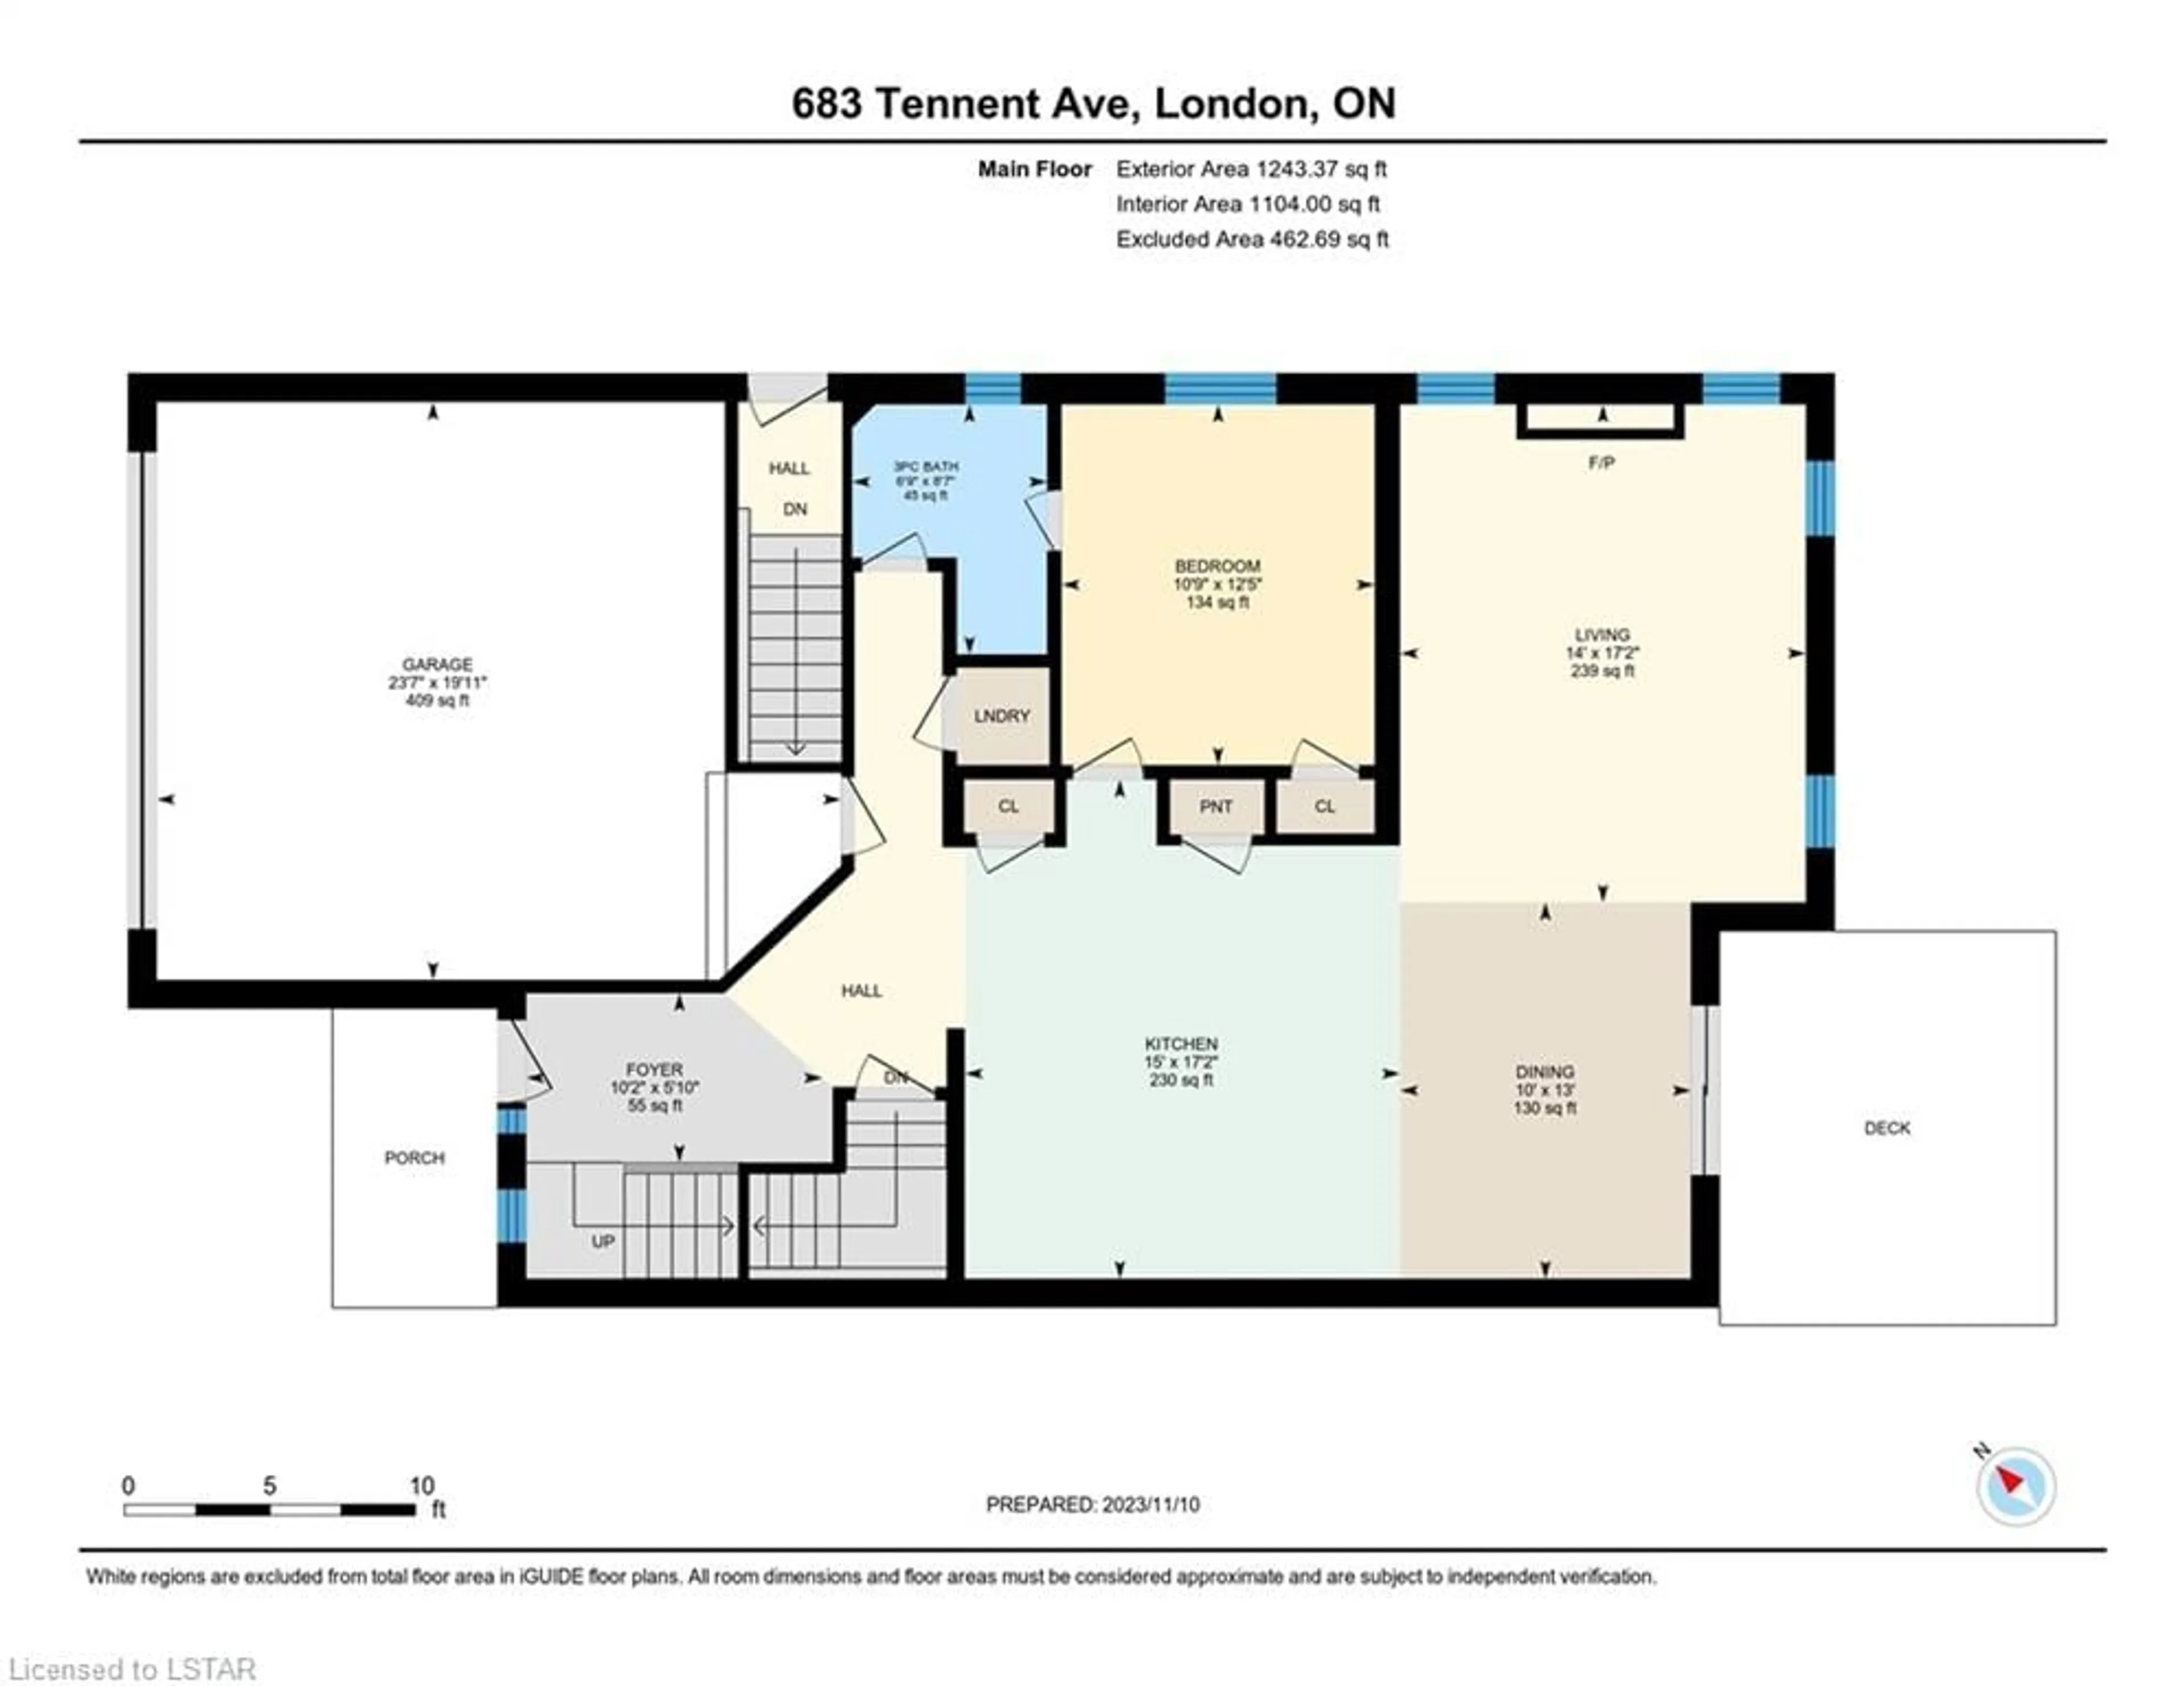 Floor plan for 683 Tennent Ave, London Ontario N5X 0L3